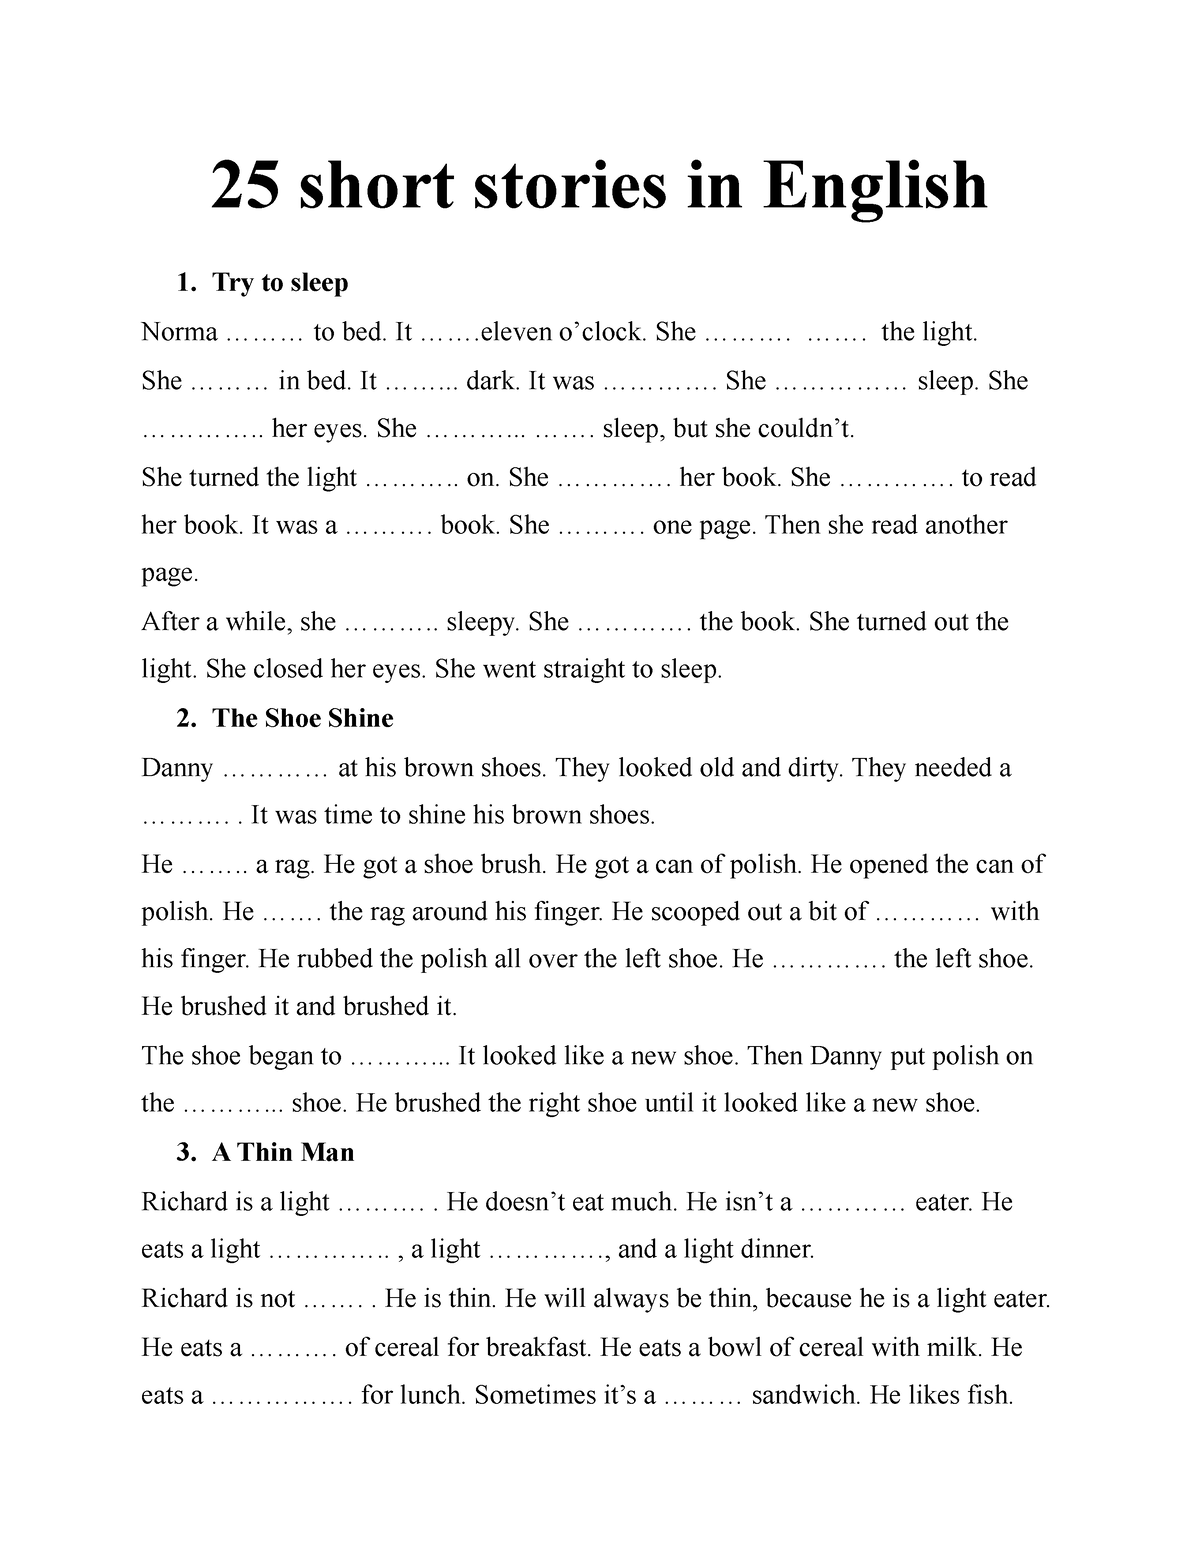 25-short-stories-in-english-listen-and-fill-in-the-gaps-25-short